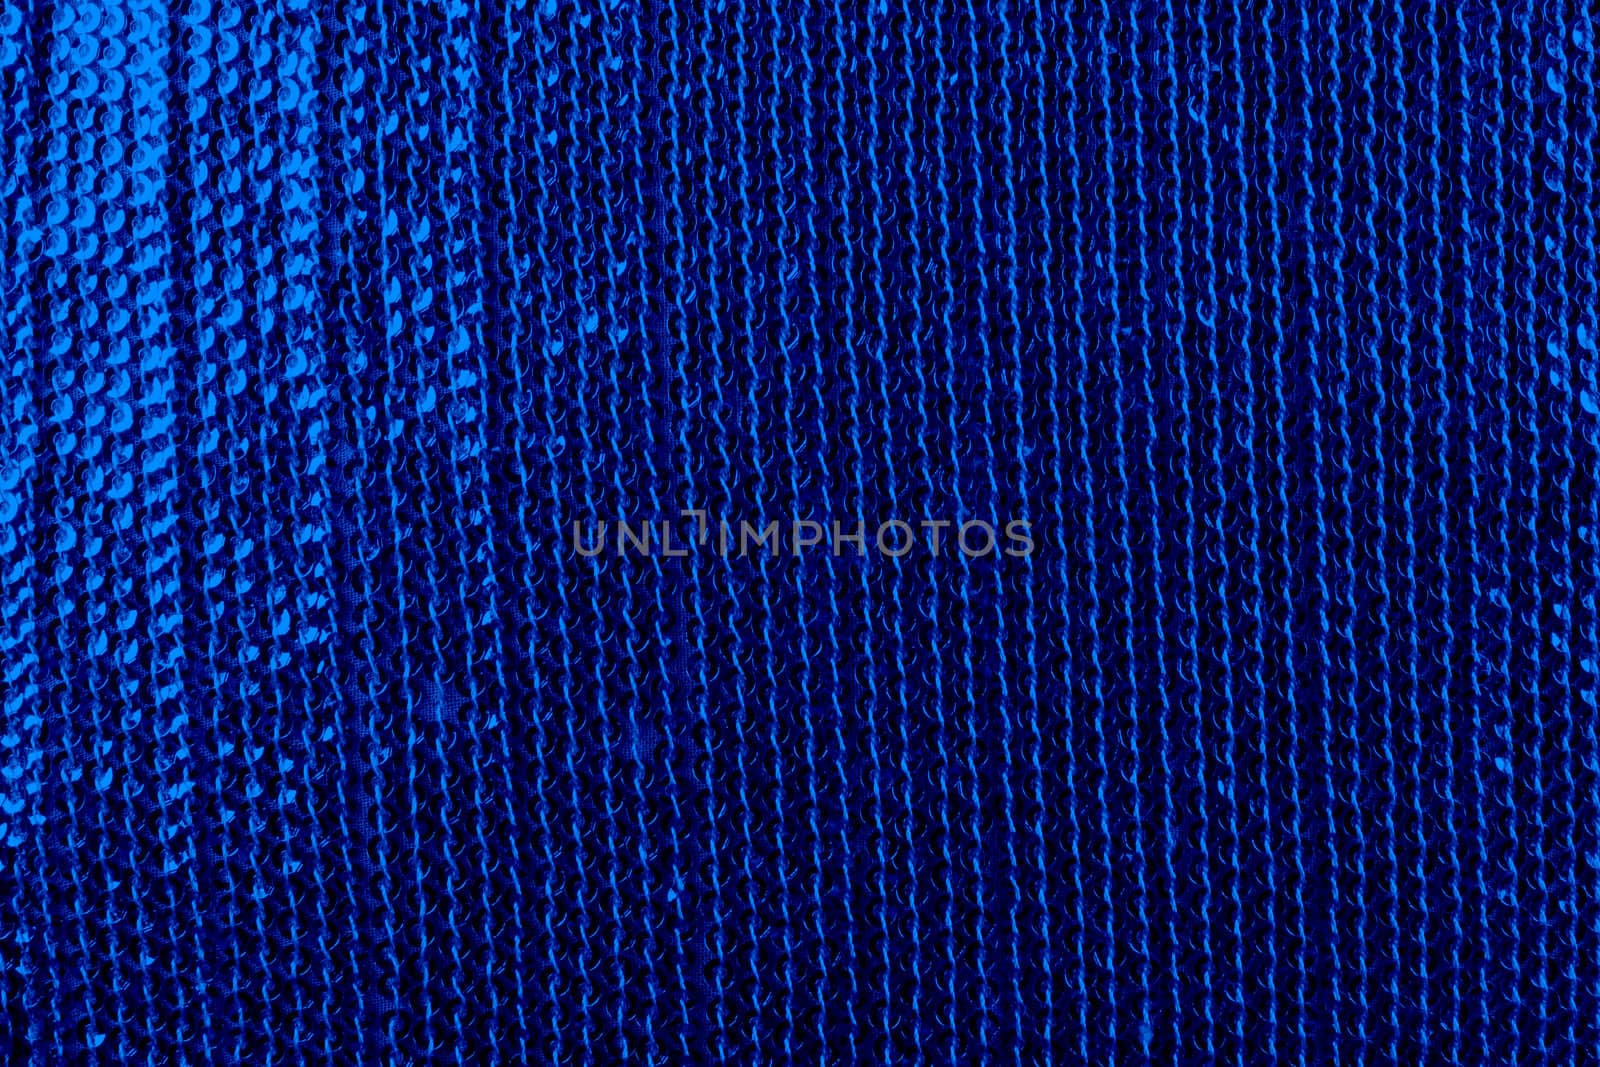 A background of a fabric with sequins, in dark blue color.